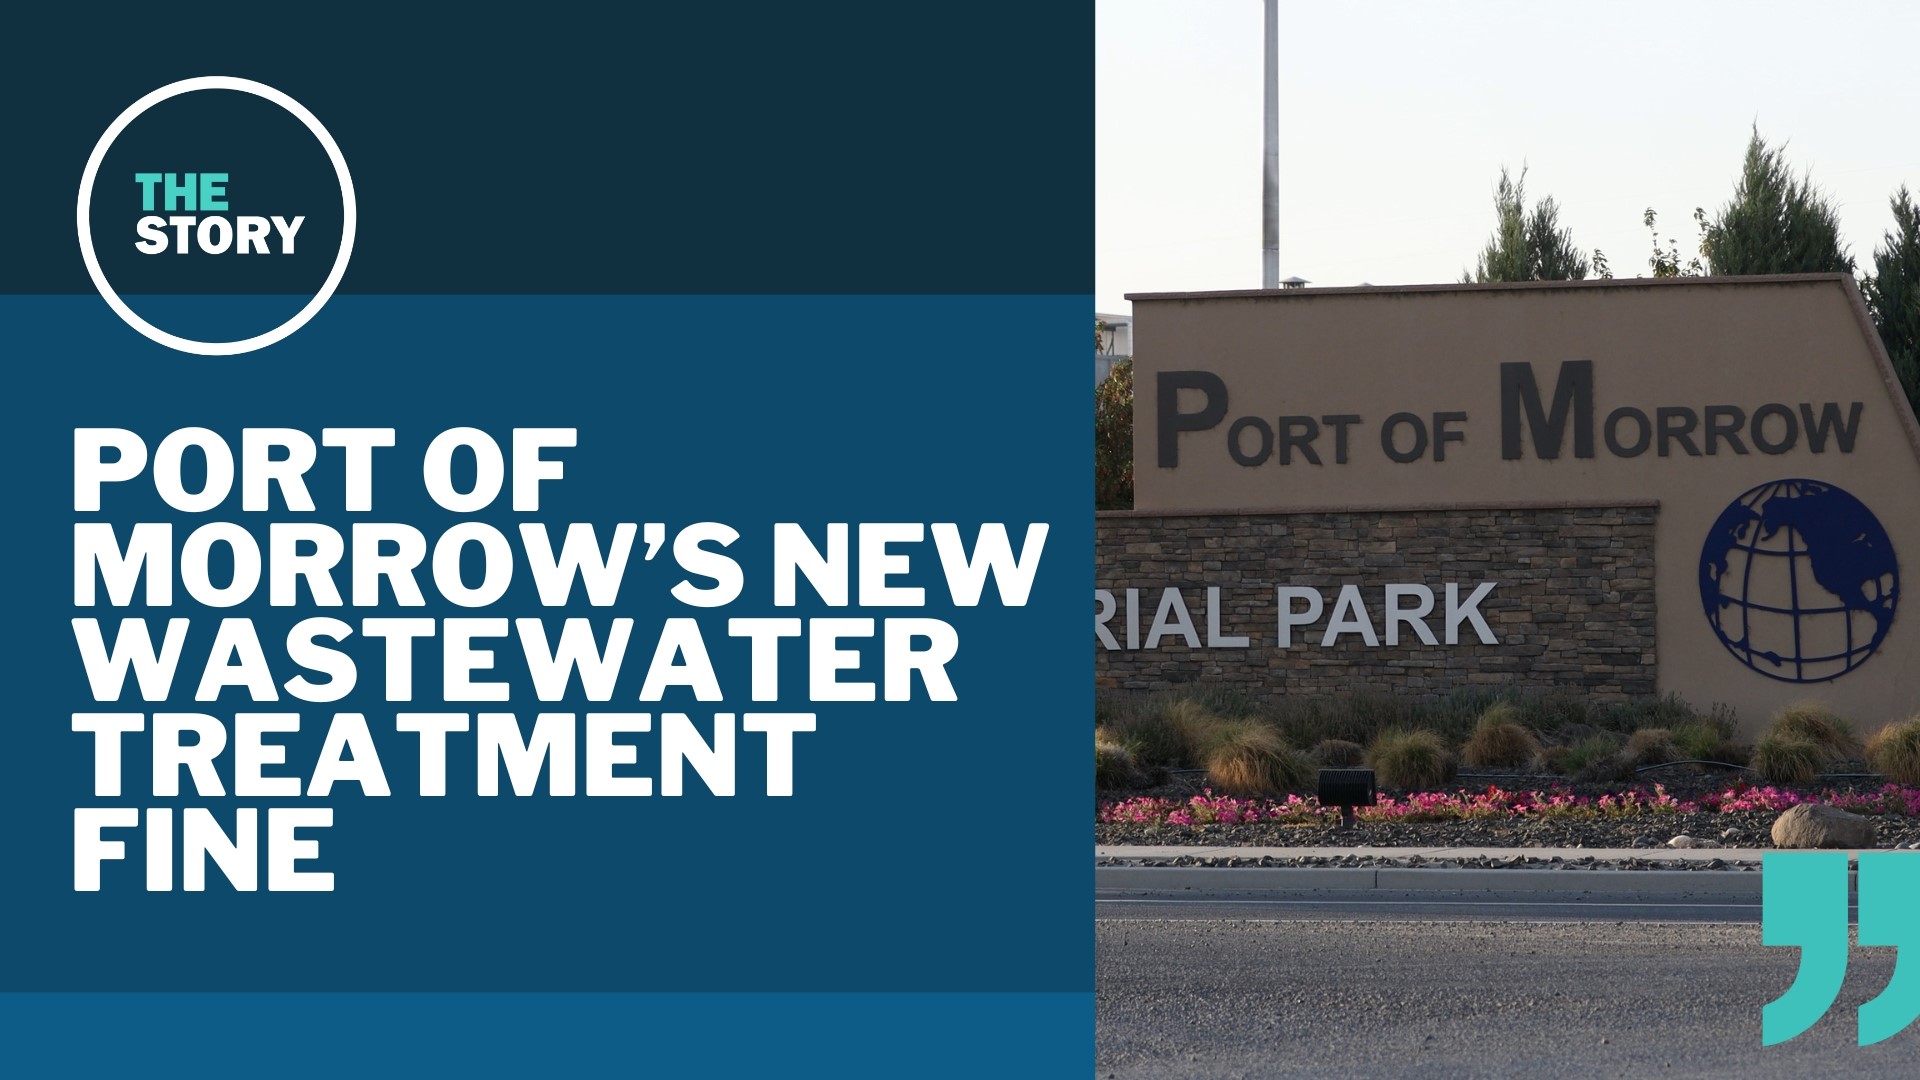 The Oregon Department of Environmental Quality has fined the Port of Morrow $727,000 for violating its wastewater treatment permit — again.